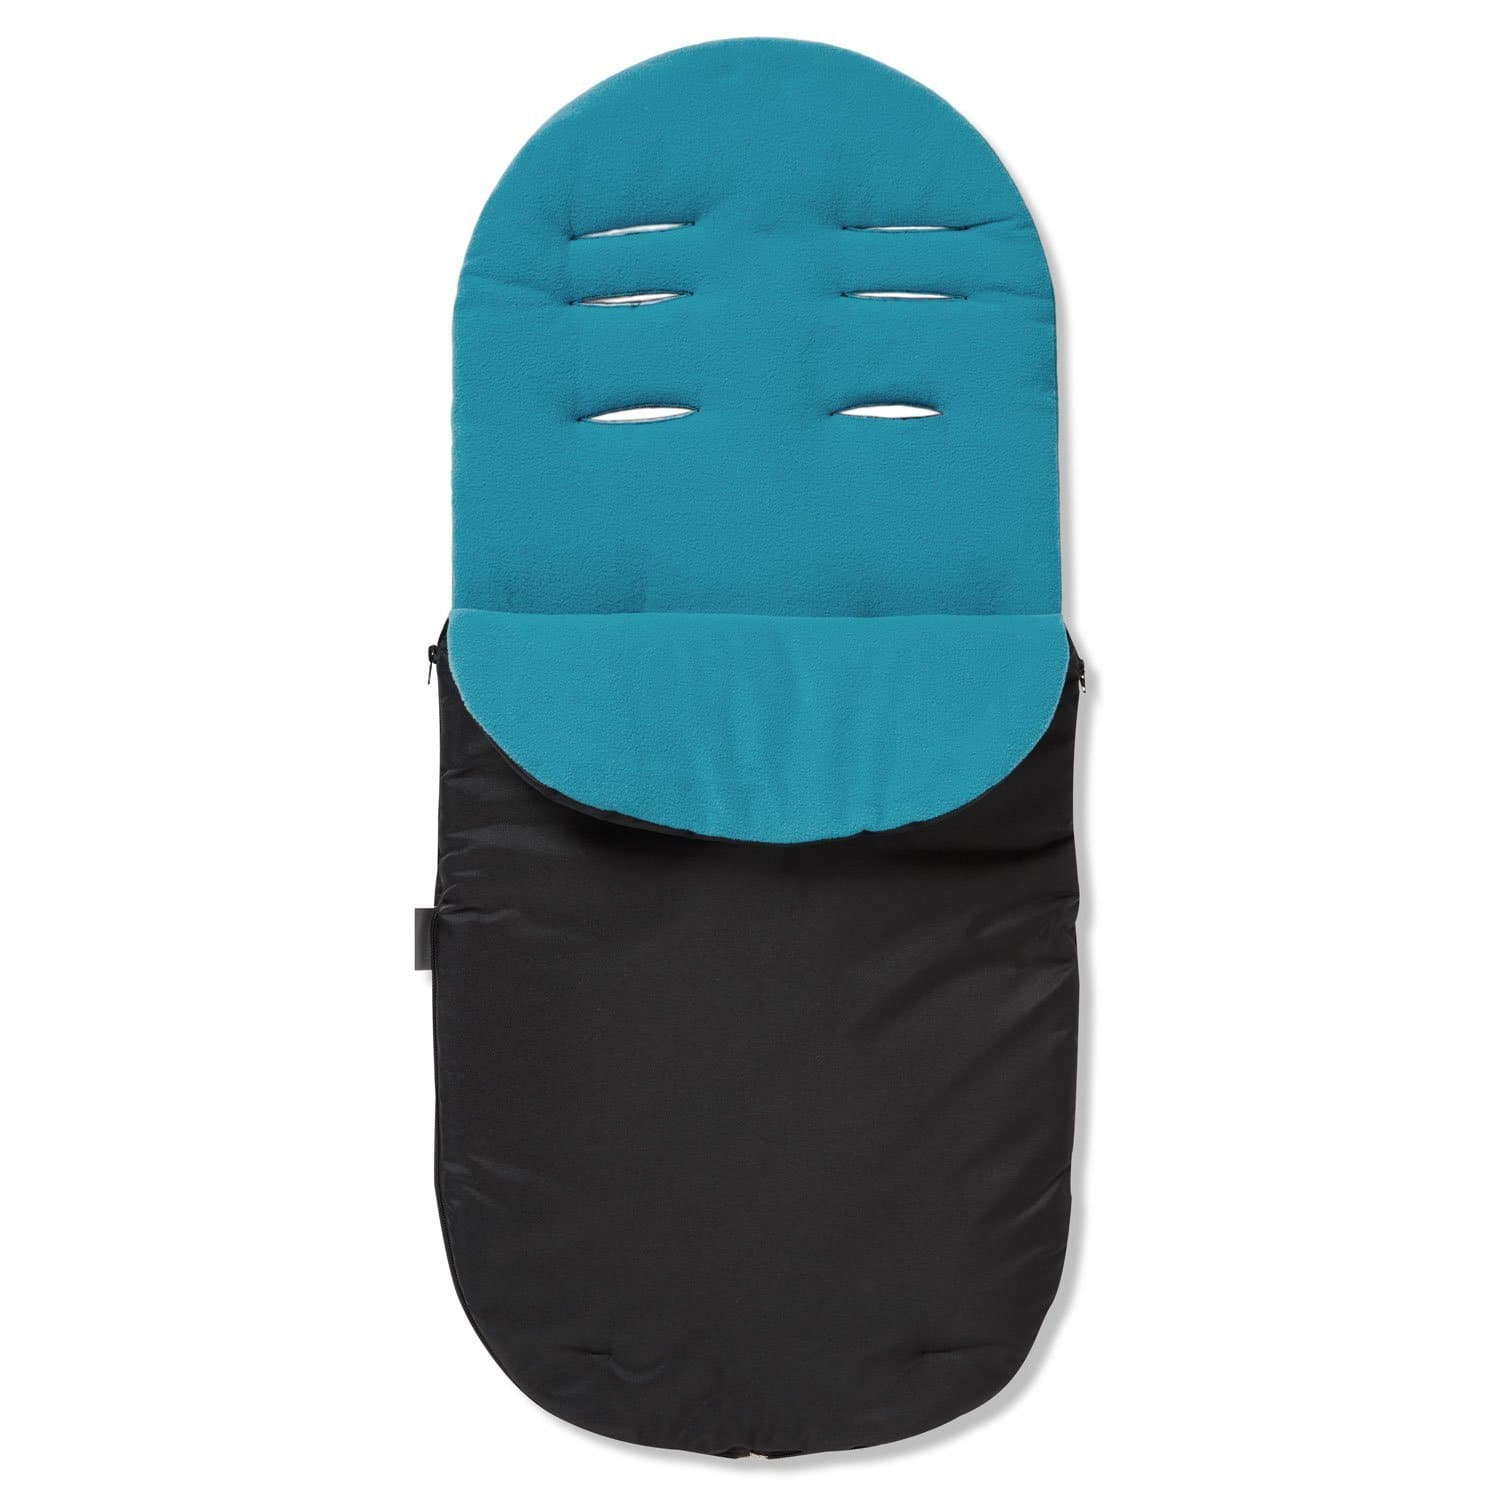 Footmuff / Cosy Toes Compatible with Egg - Turquoise / Fits All Models | For Your Little One